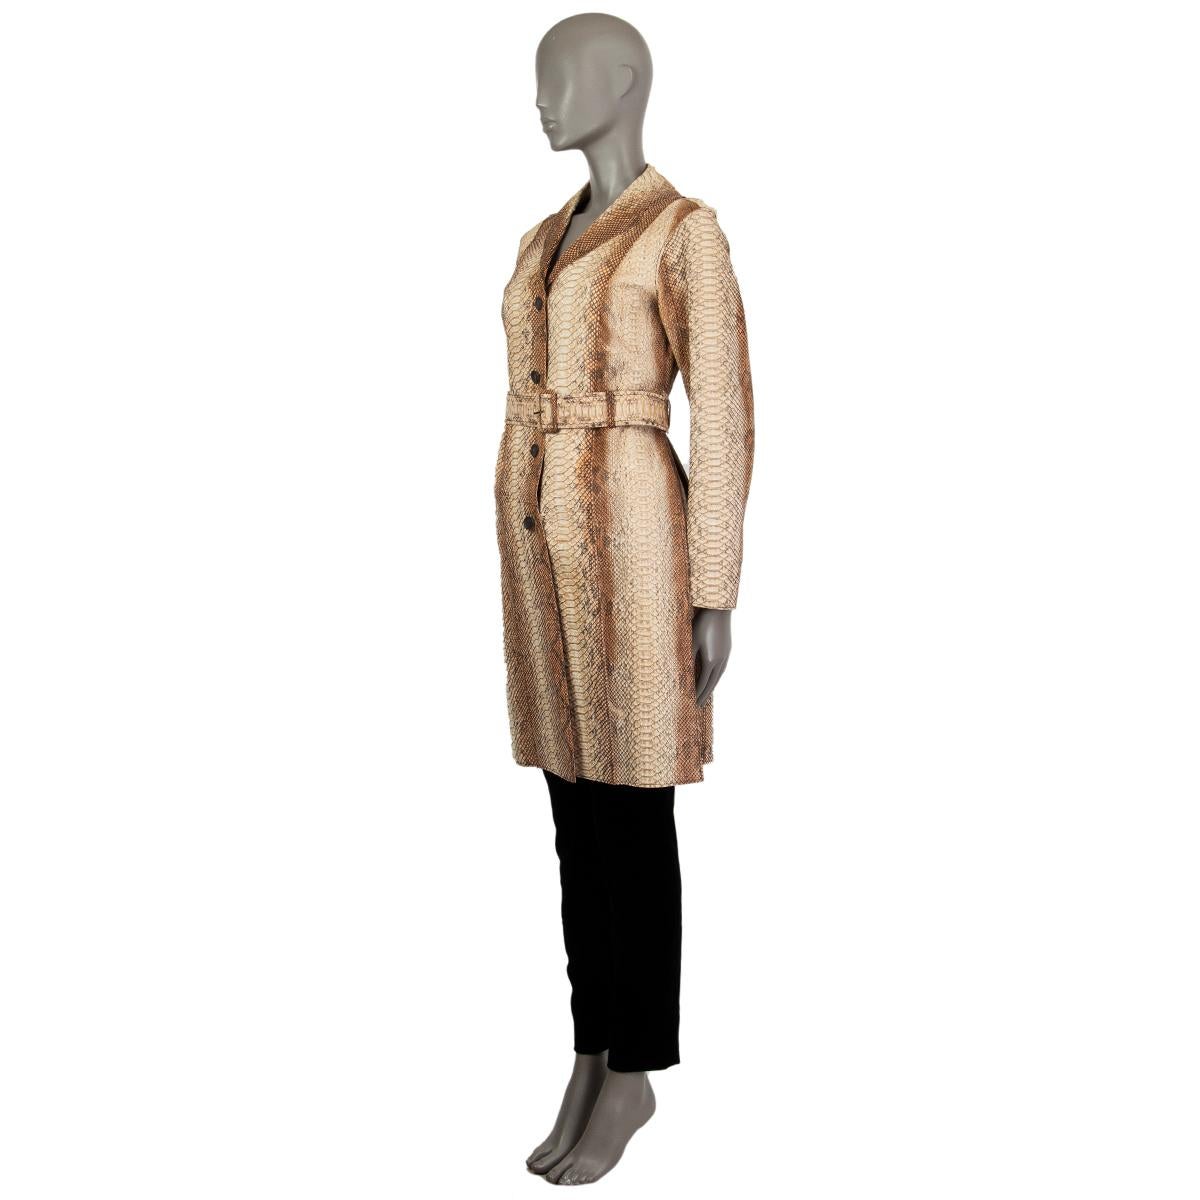 100% authentic Prada trench coat in brown and cream python with a notch collar. Comes with a matching belt. Closes on the front with buttons. Unlined. Has been worn and is in excellent condition.  

Measurements
Tag Size	42
Size	M
Shoulder